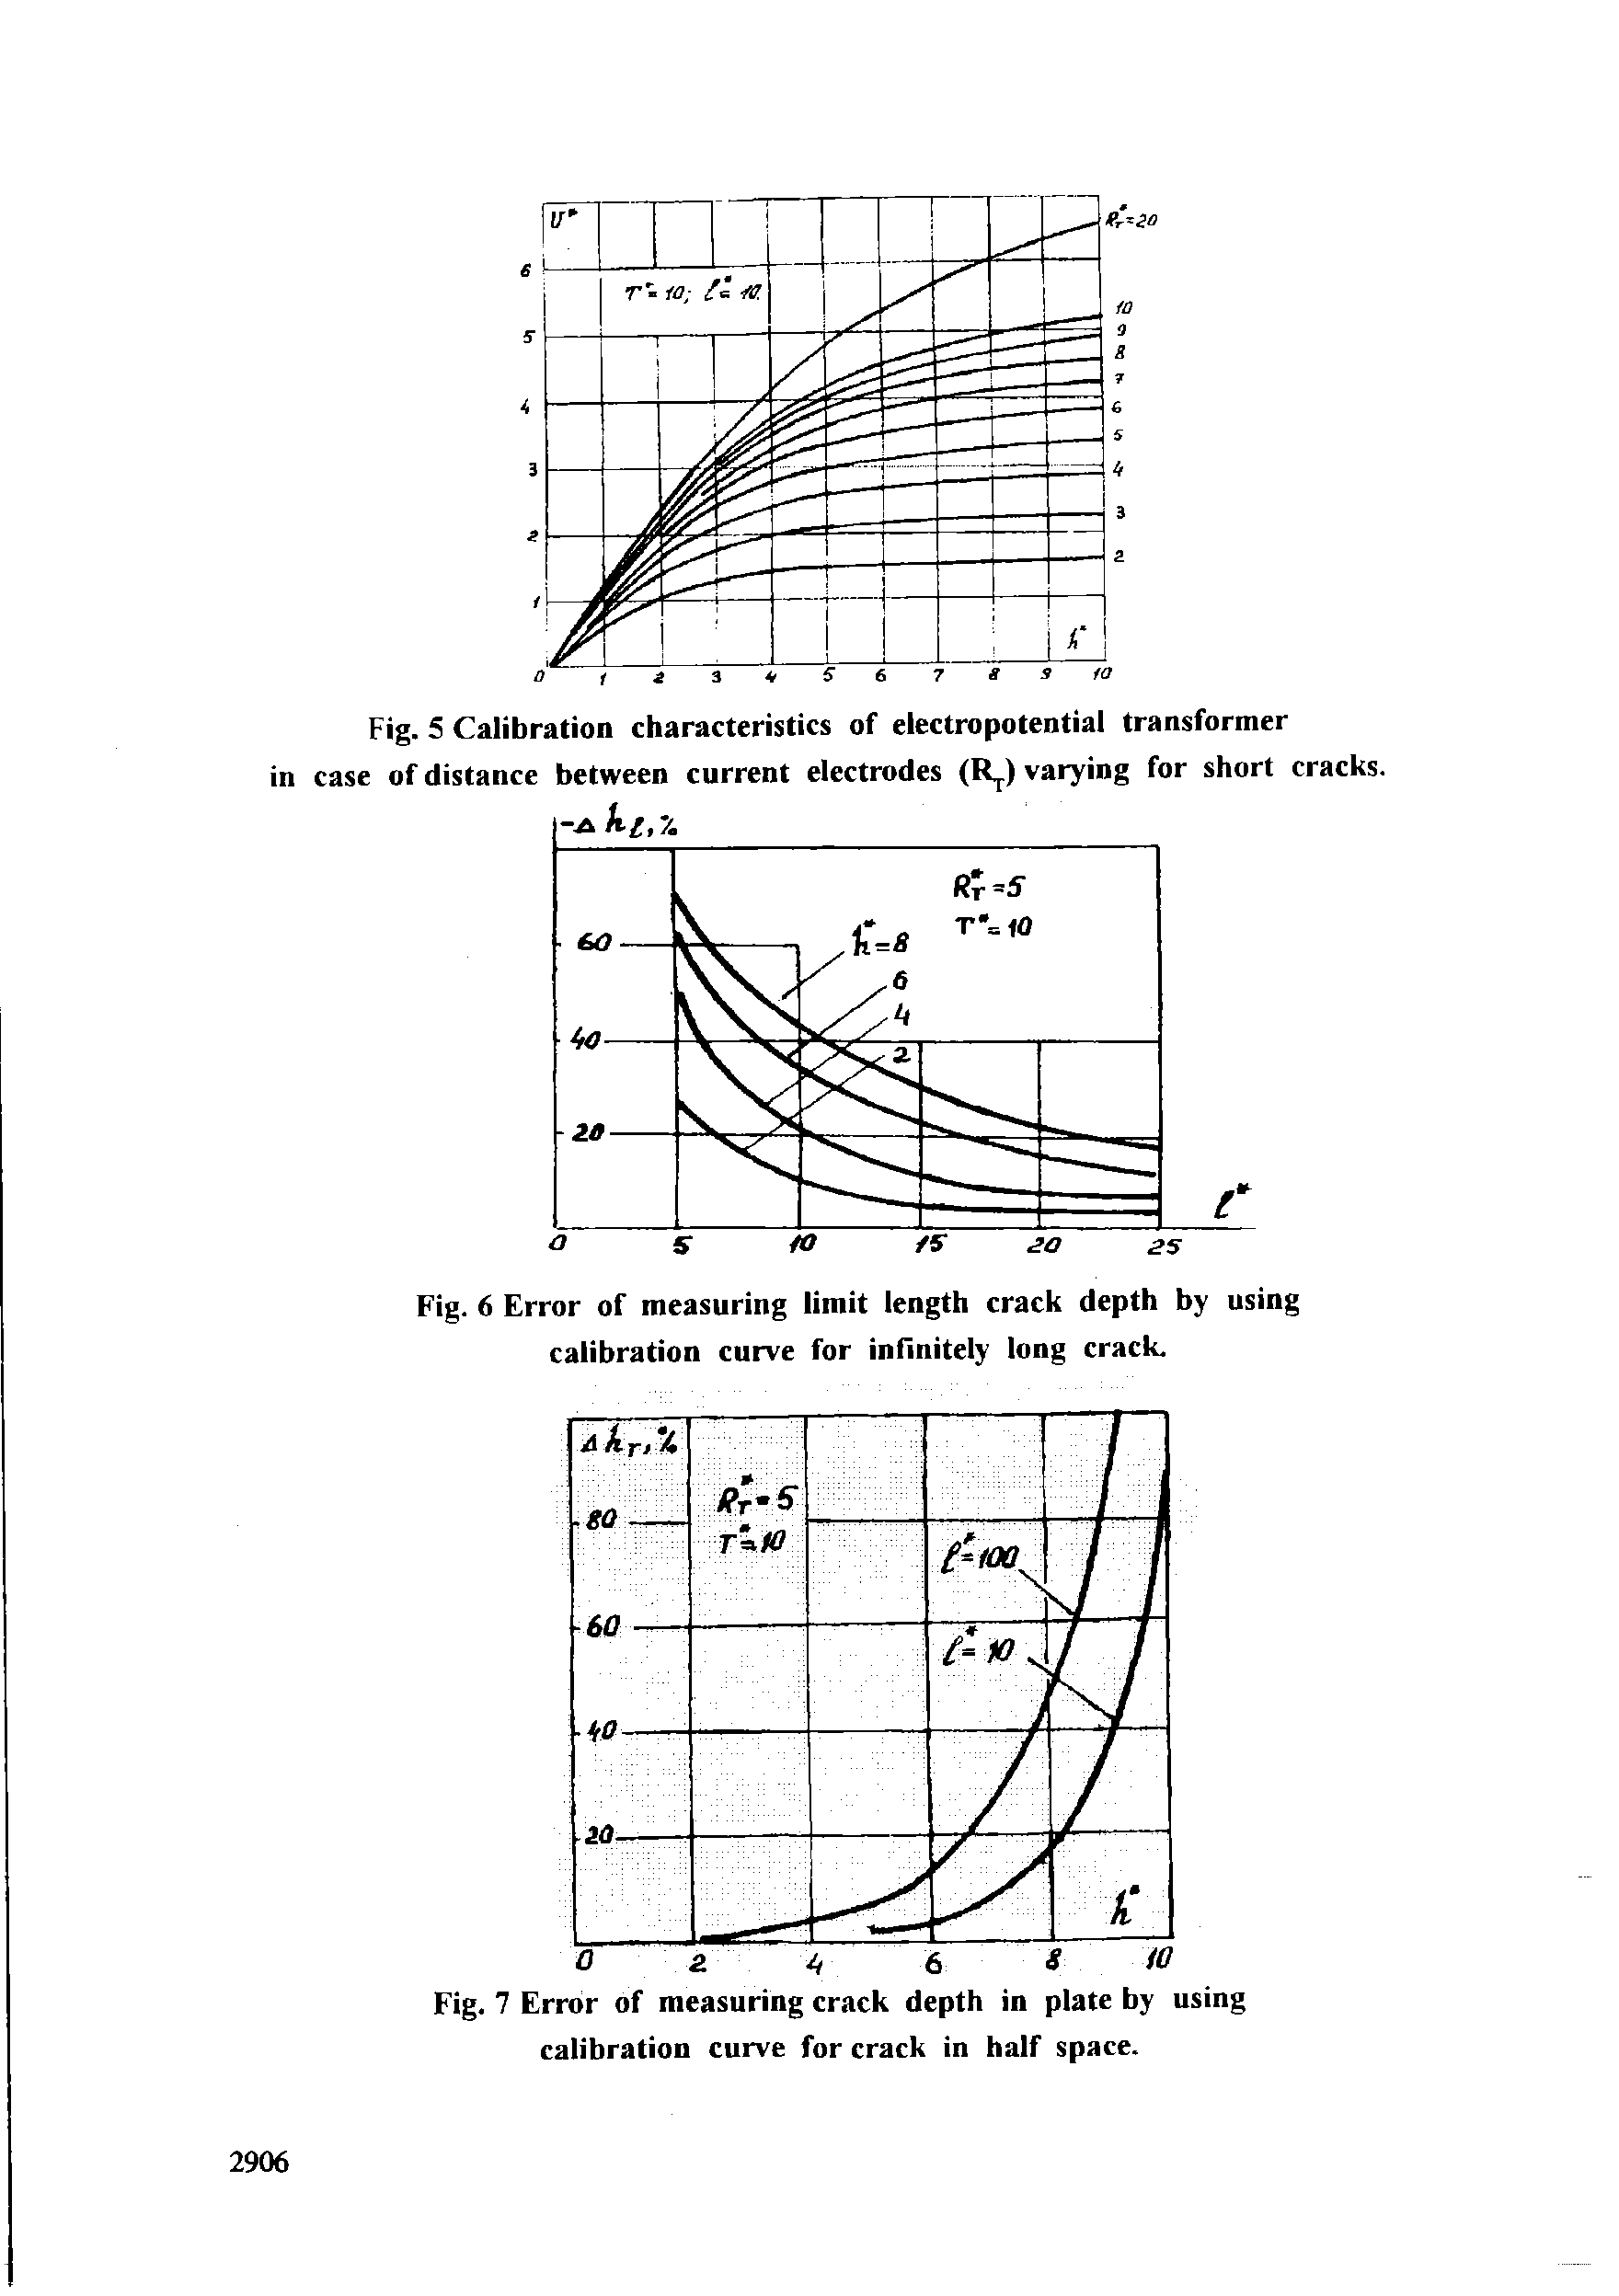 Fig. 7 Error of measuring crack depth in plate by using calibration curve for crack in half space.